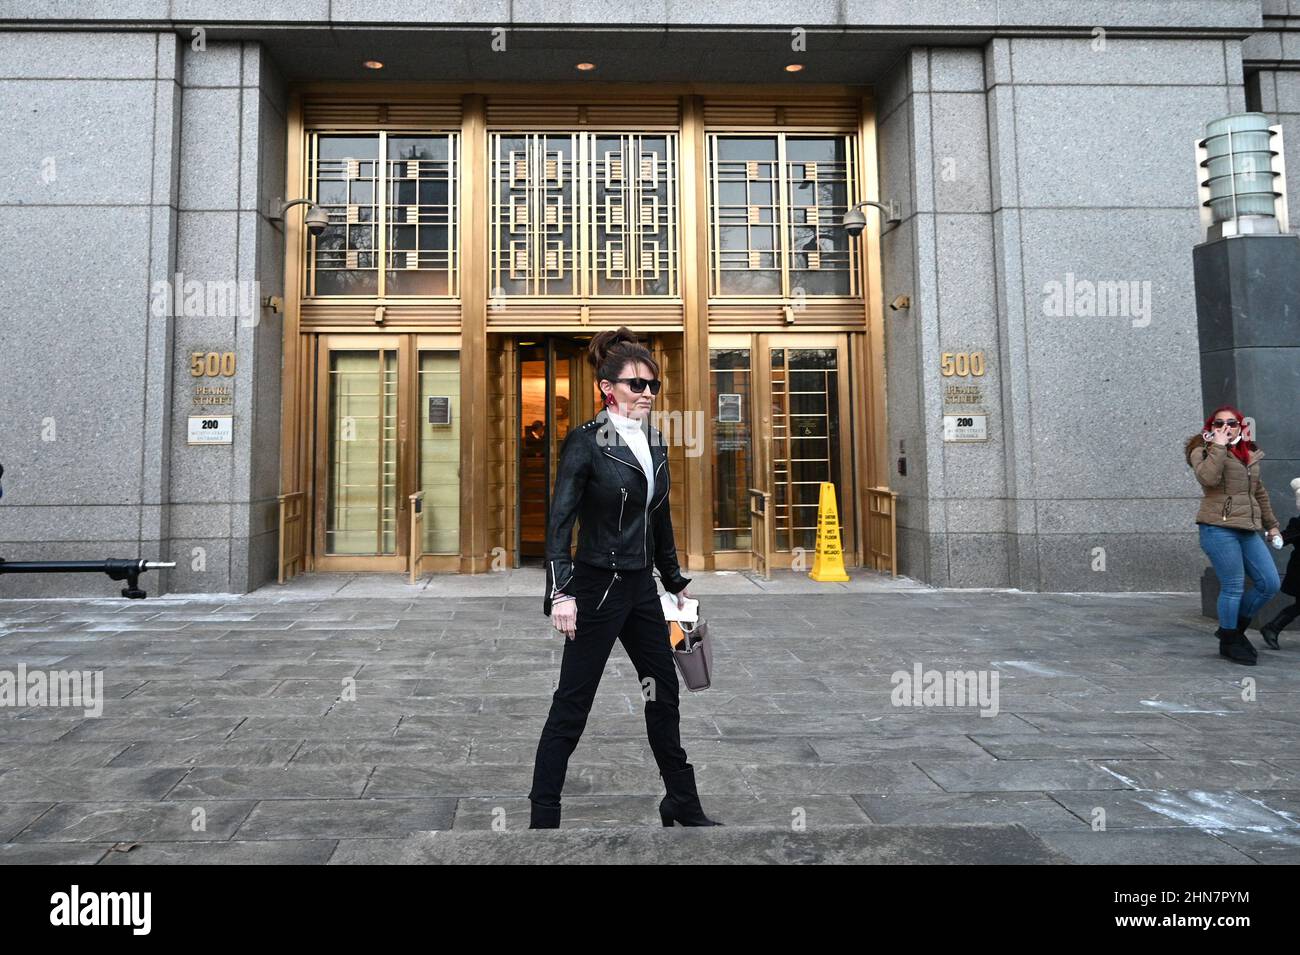 New York, USA. 14th Feb, 2022. Former Alaska Gov. Sarah Palin is seen leaving the U.S. District Court, in New York, NY, February 14, 2022. U.S. District Judge Jed Rakoff ruled that he will dismiss a libel lawsuit that Palin filed against The New York Times while the jury was still deliberating; Palin is claiming The New York Times damaged her reputation with an editorial falsely linking her campaign rhetoric to a mass shooting. (Photo by Anthony Behar/Sipa USA) Credit: Sipa USA/Alamy Live News Stock Photo